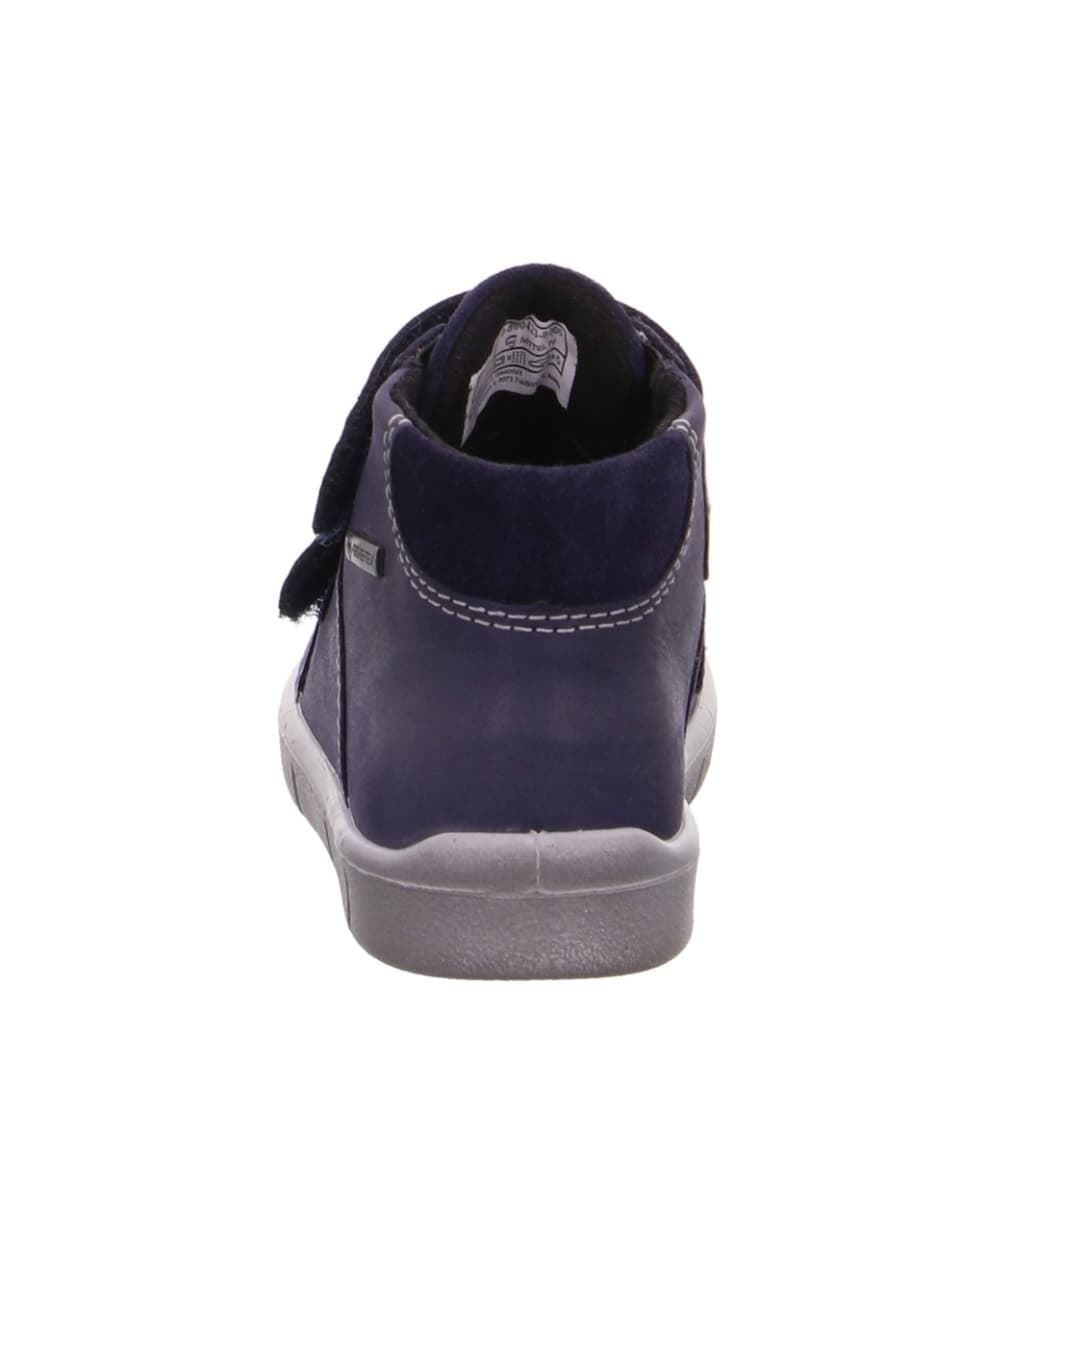 Superfit Gore-tex Baby Boots Navy Blue - Image 3